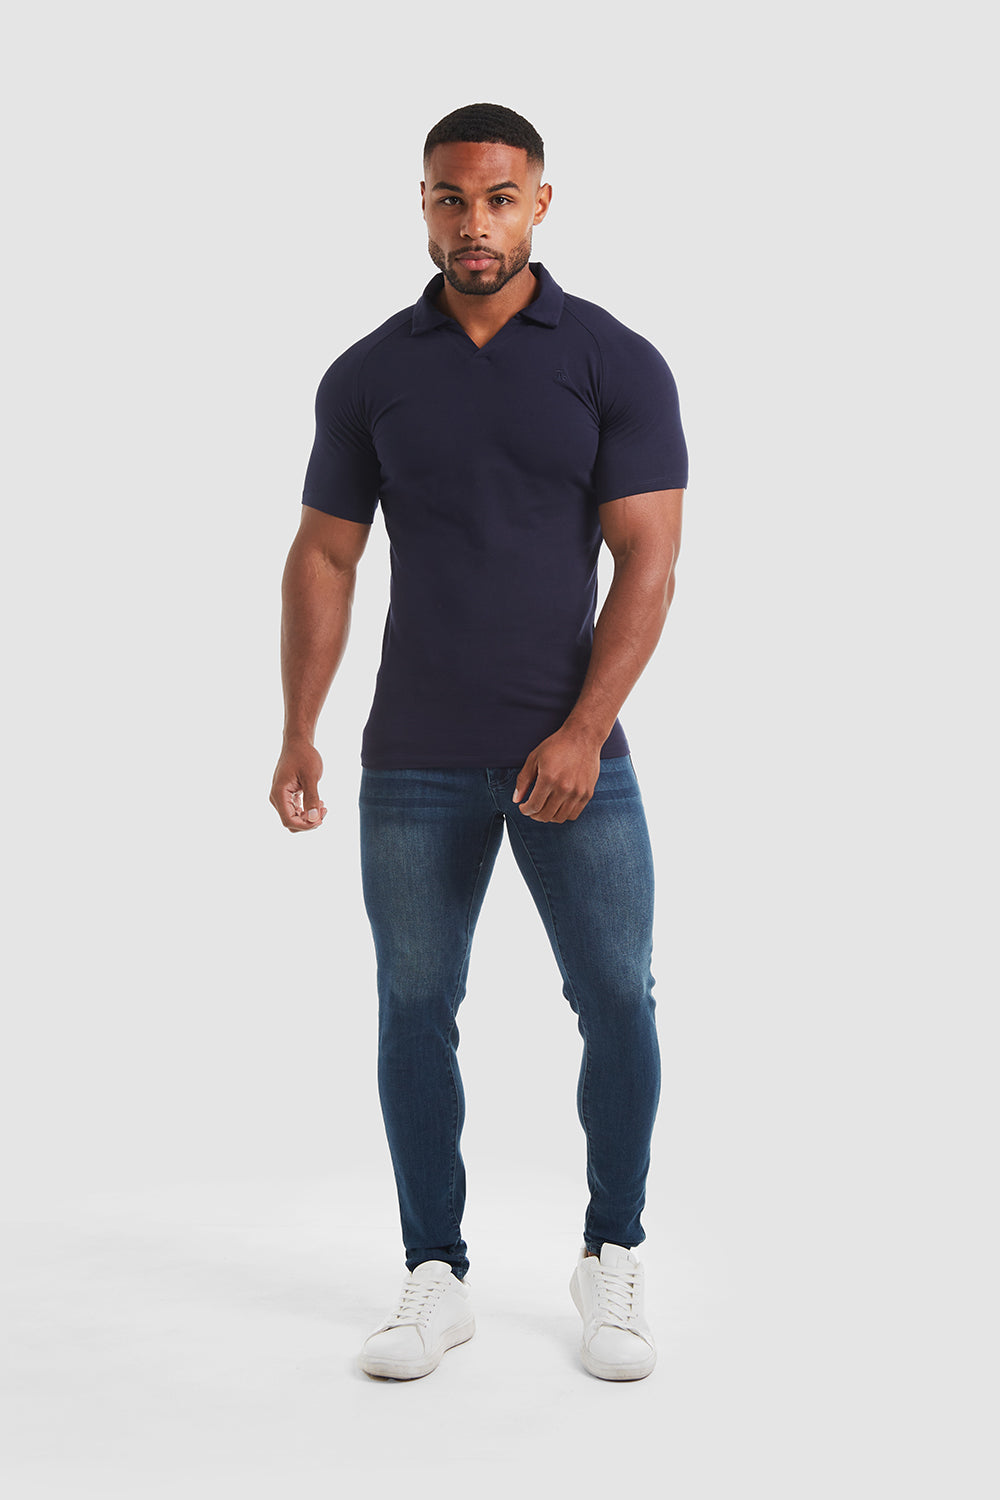 Jersey Buttonless Polo Shirt in Navy - TAILORED ATHLETE - ROW